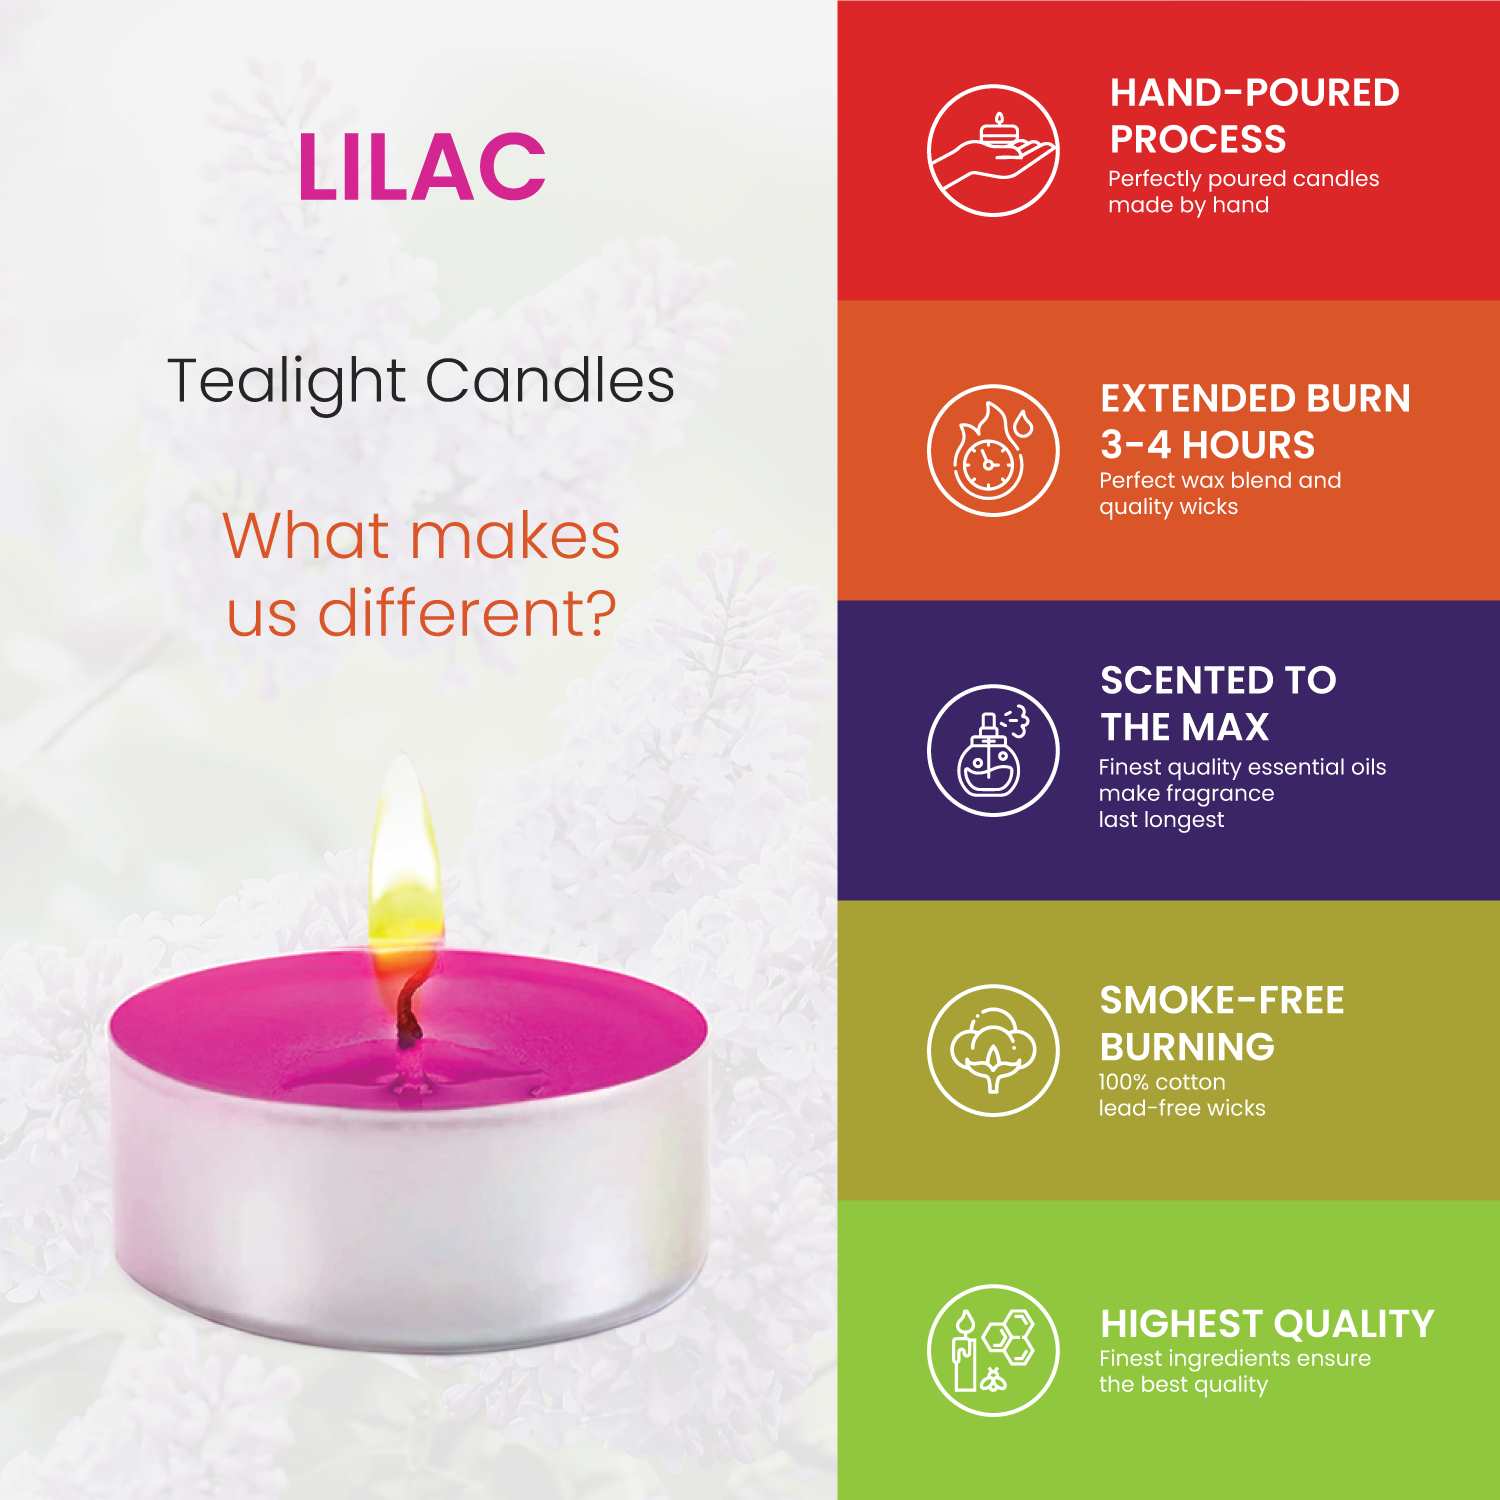 Lilac Scented Tealight Candles - 30 Pack